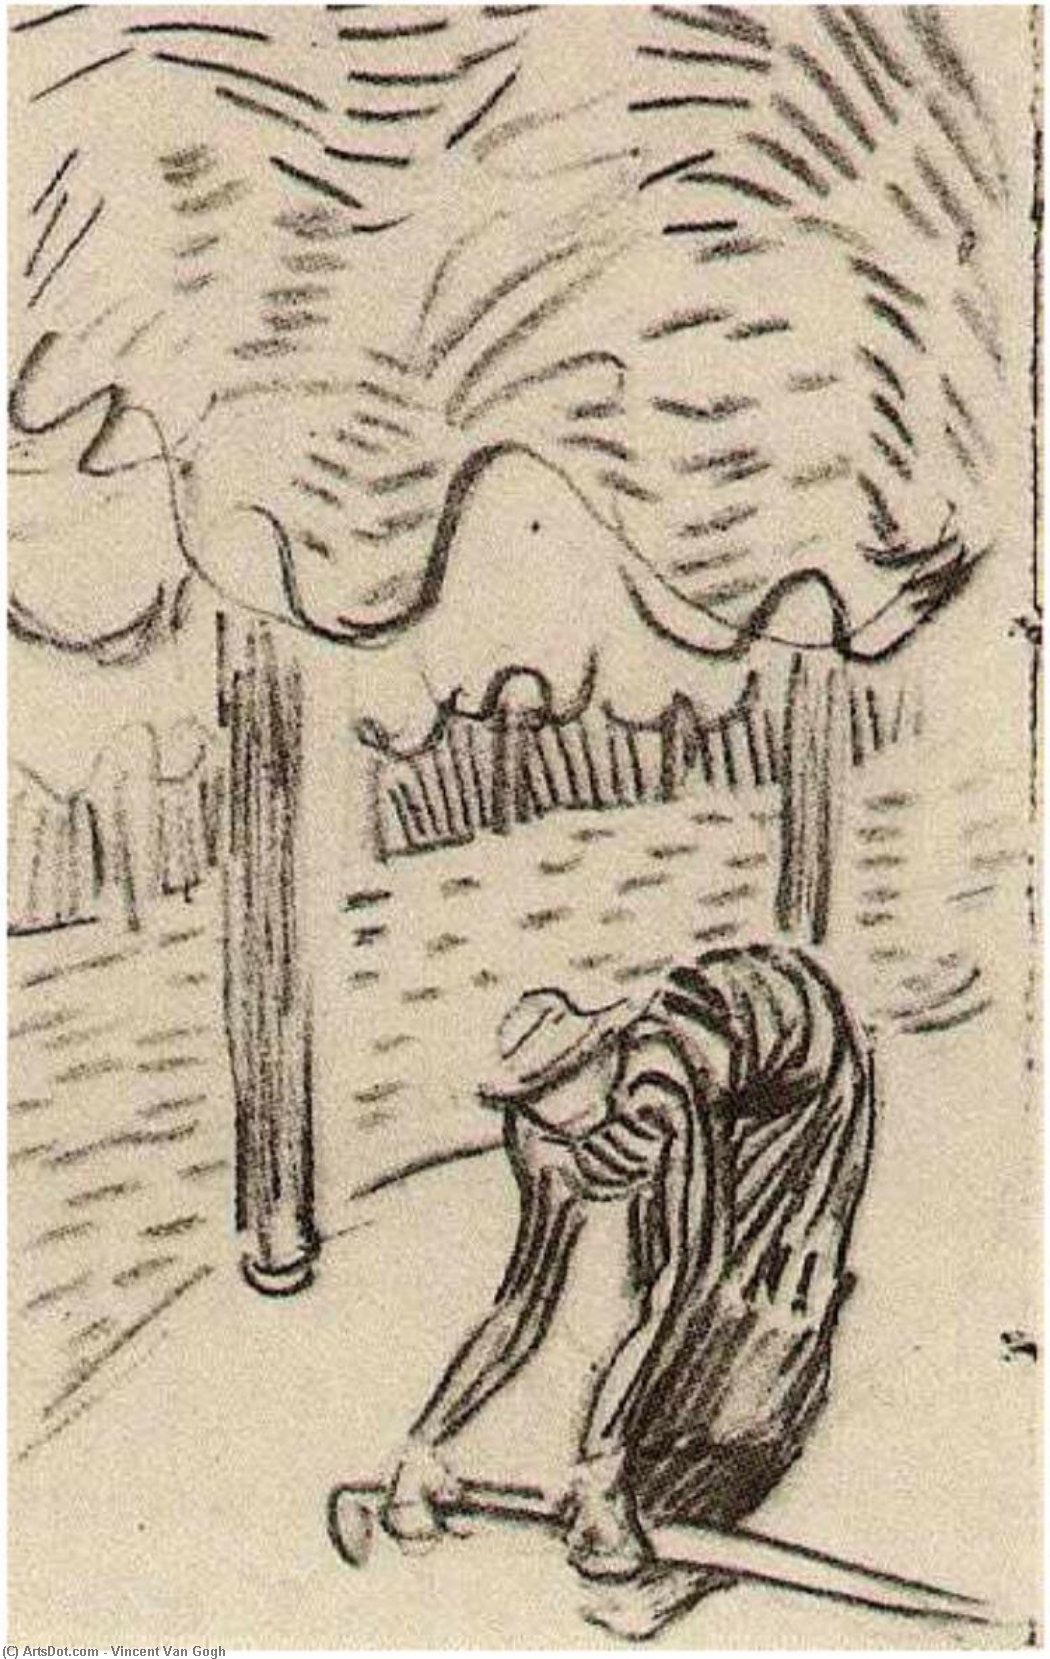 WikiOO.org - Güzel Sanatlar Ansiklopedisi - Resim, Resimler Vincent Van Gogh - A Woman Picking Up a Stick in Front of Trees